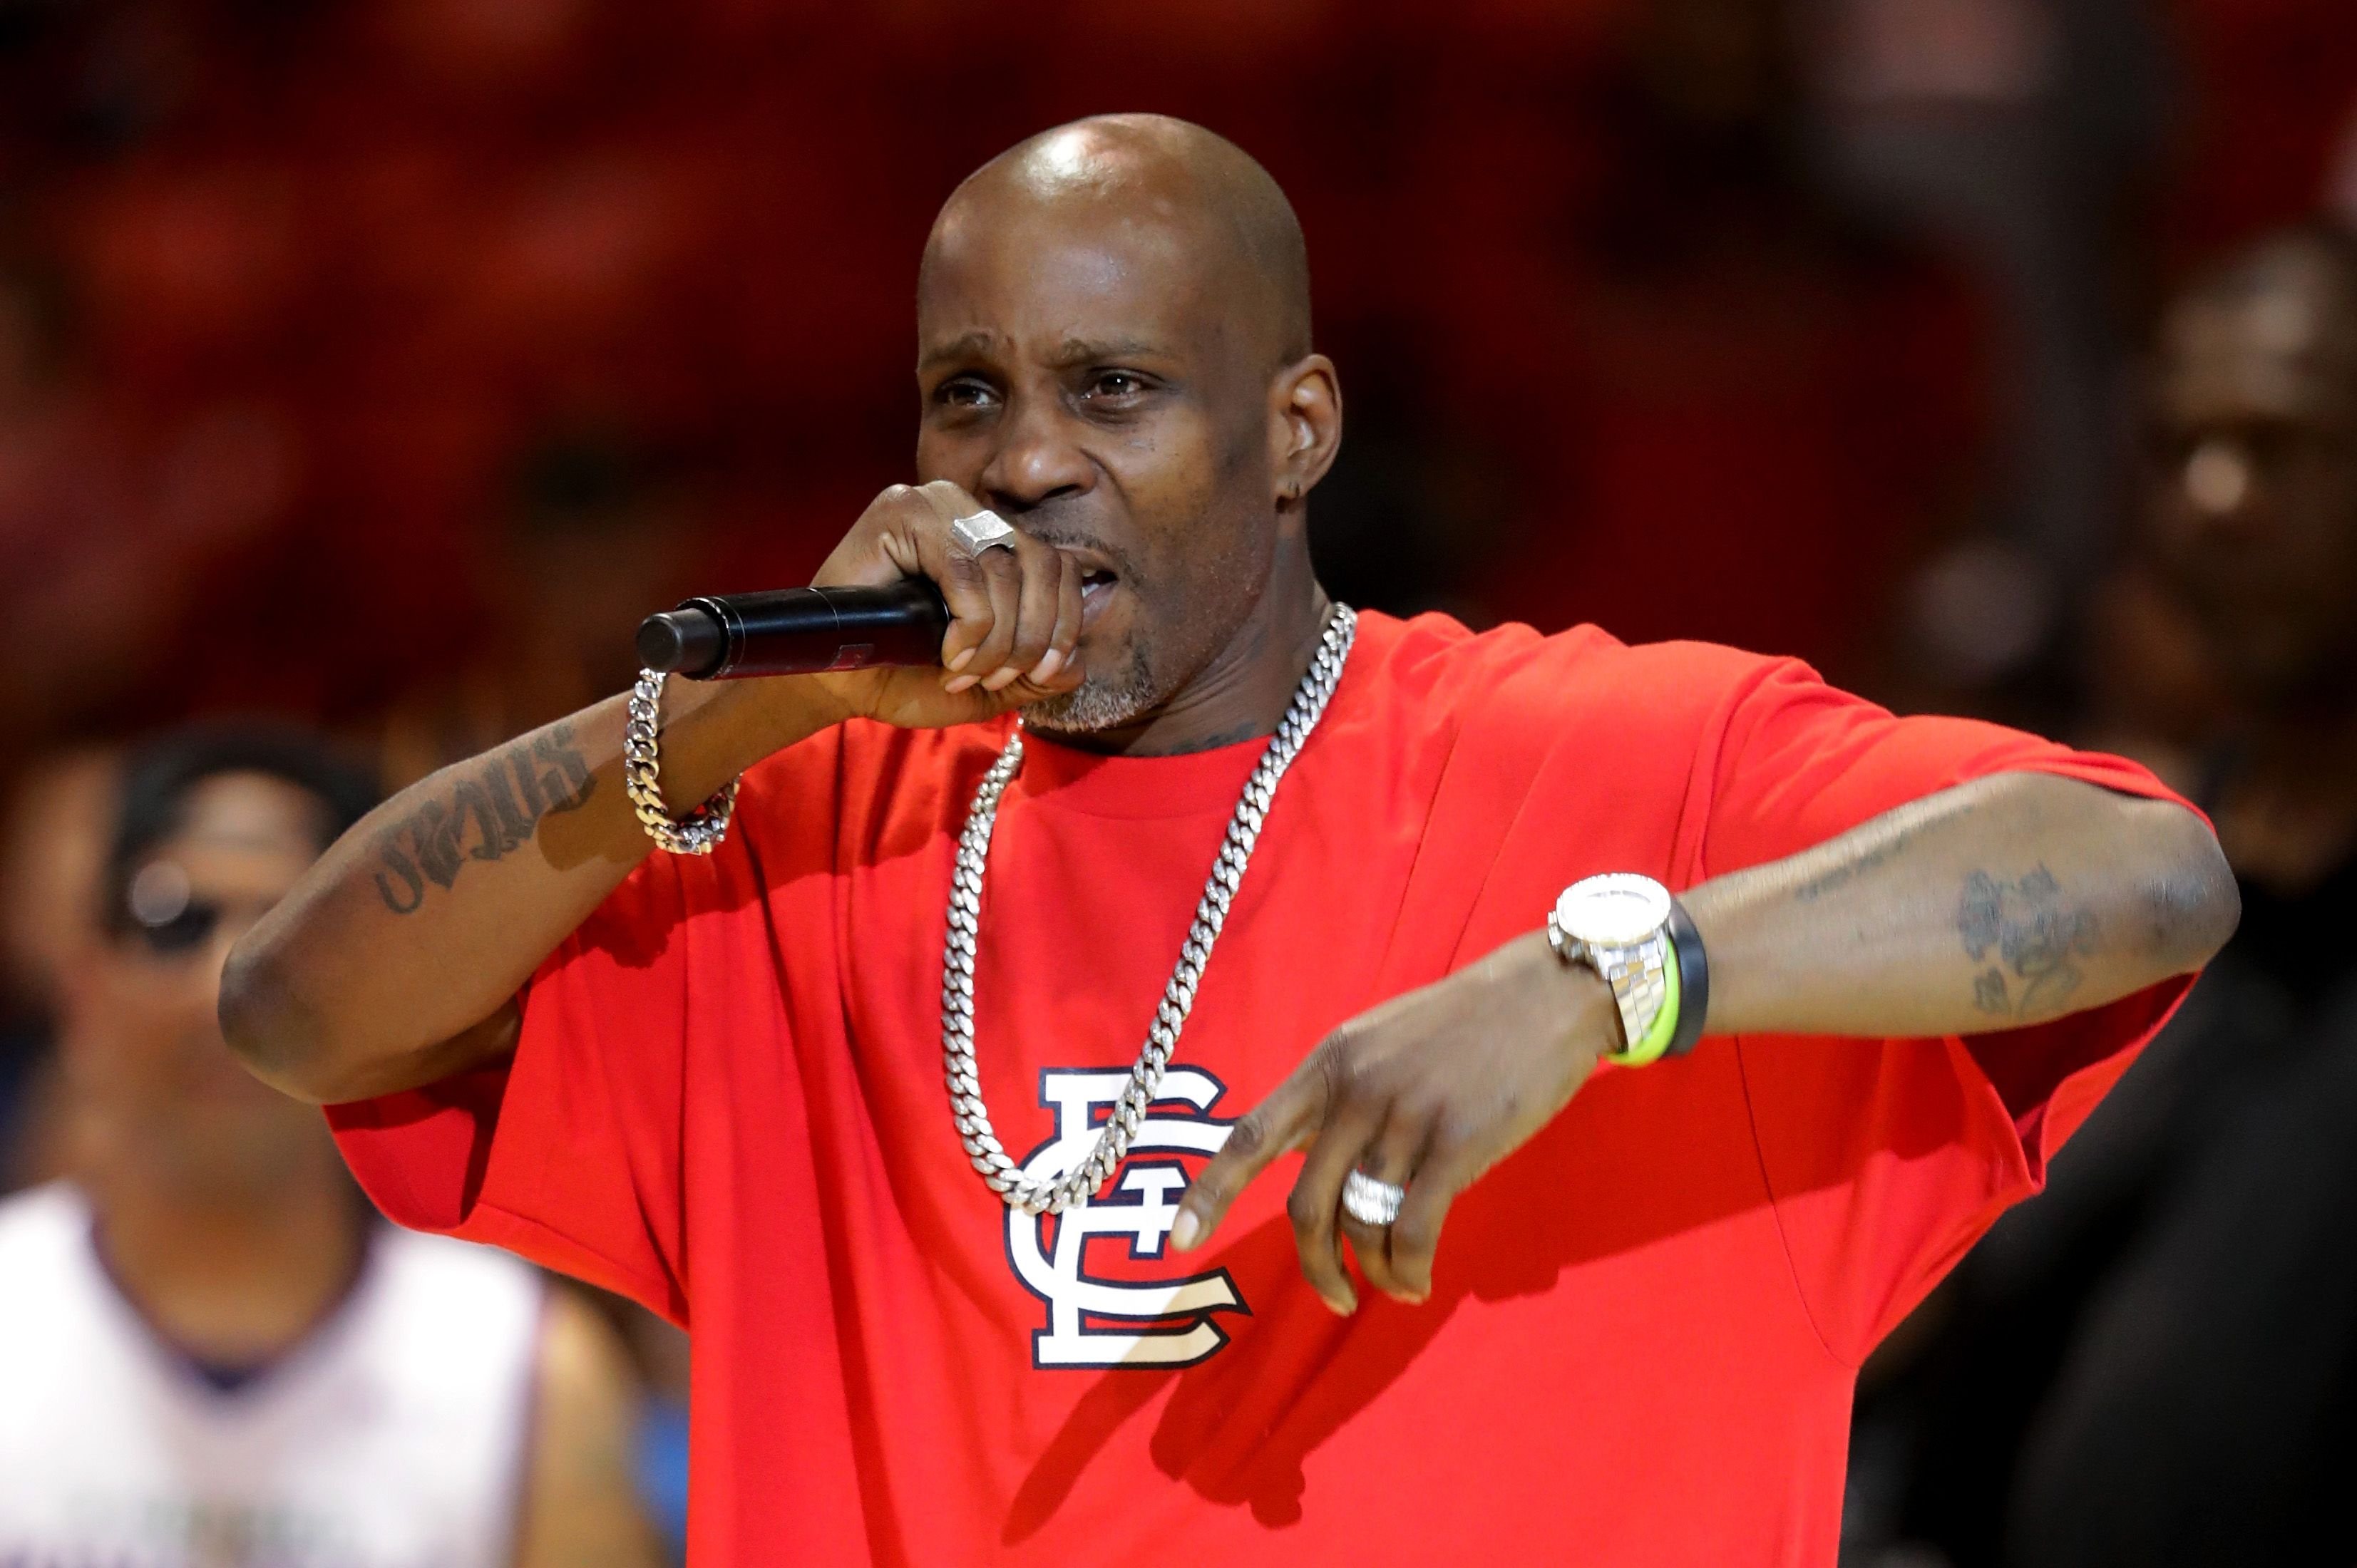 DMX at the UIC Pavilion on July 23, 2017 in Chicago. | Photo: Getty Images